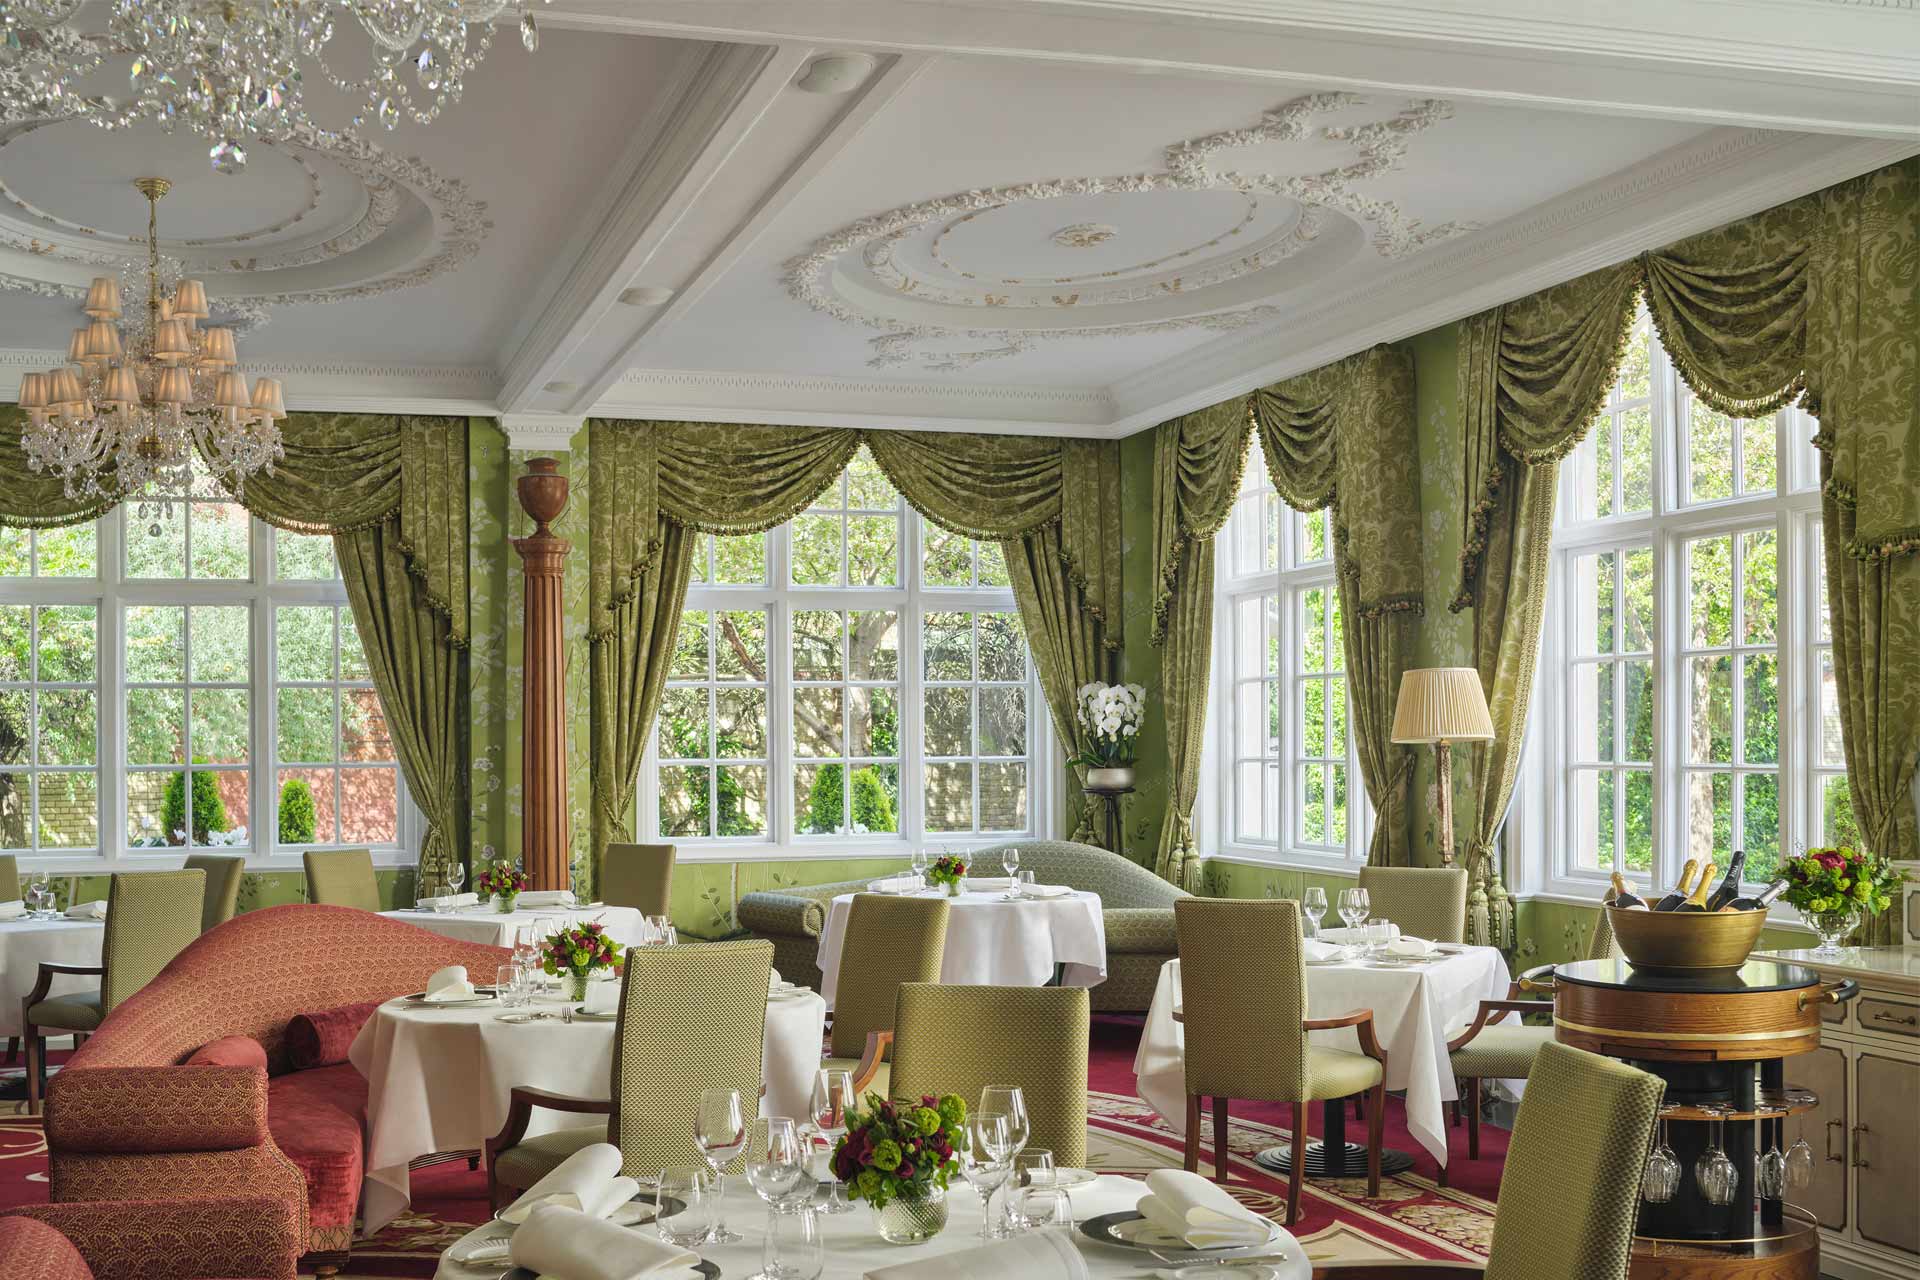 The Dining Room at The Goring